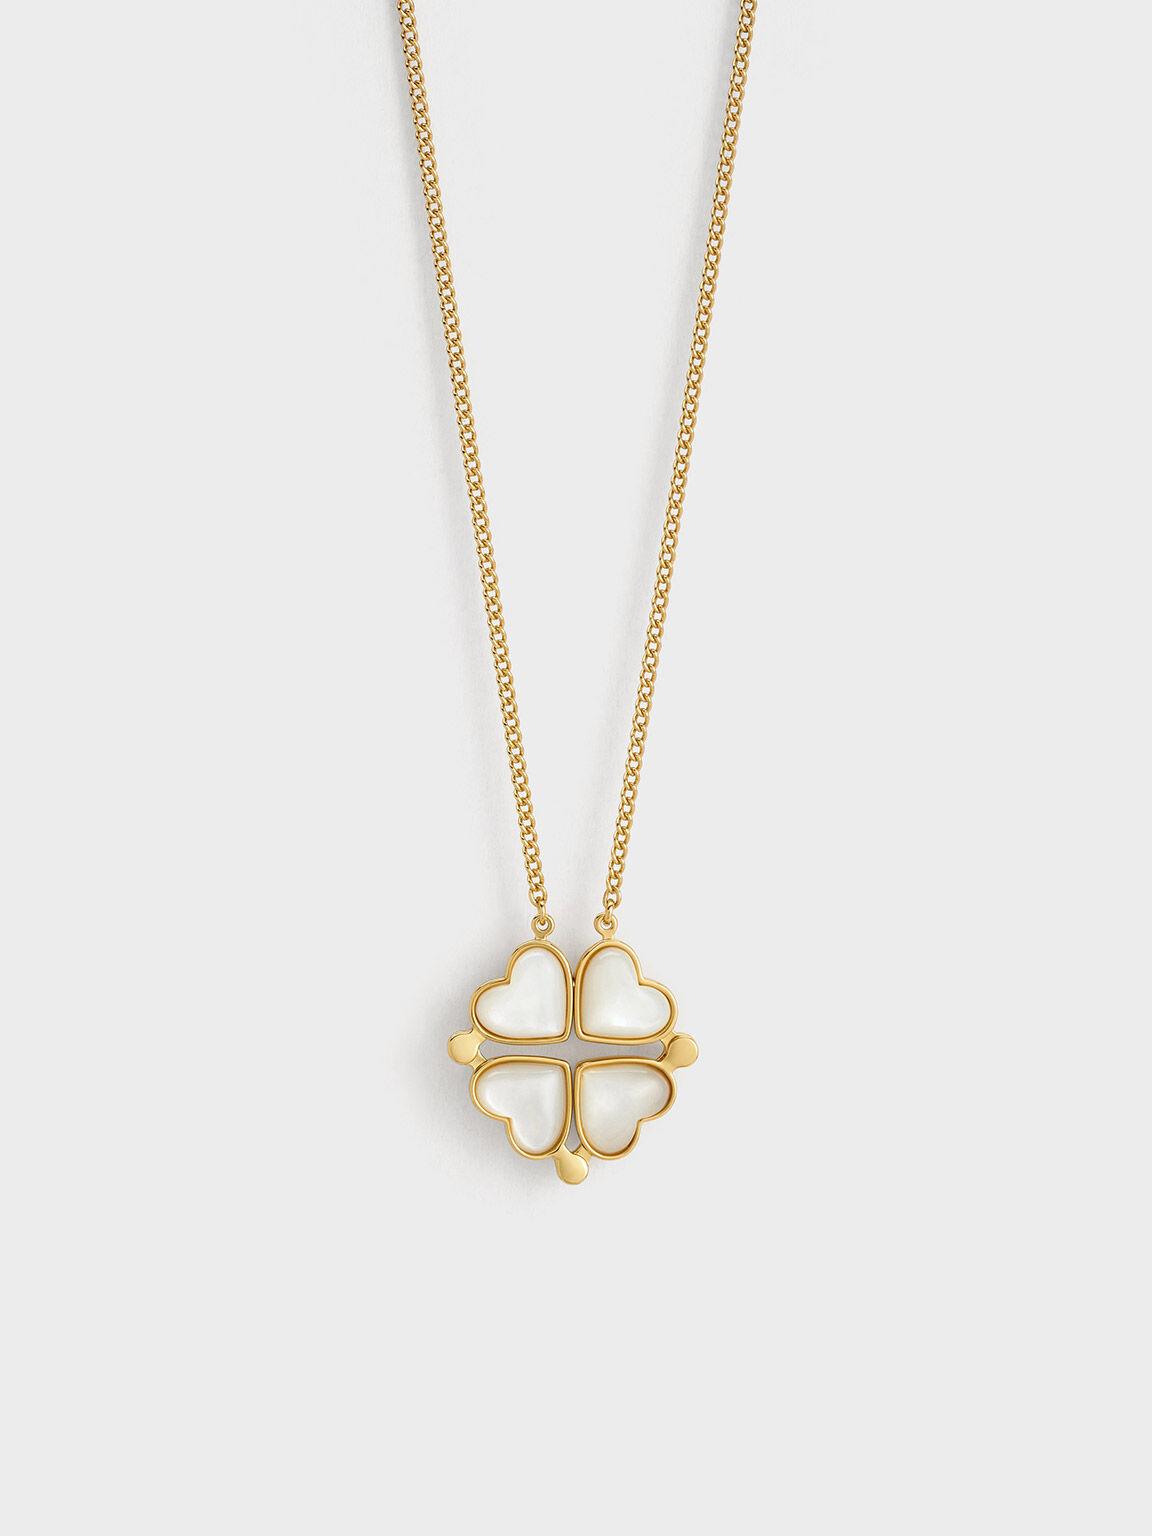 Buy Good Luck Clover Rose Gold Plated Sterling Silver Pendant Chain Necklace  by Mannash™ Jewellery